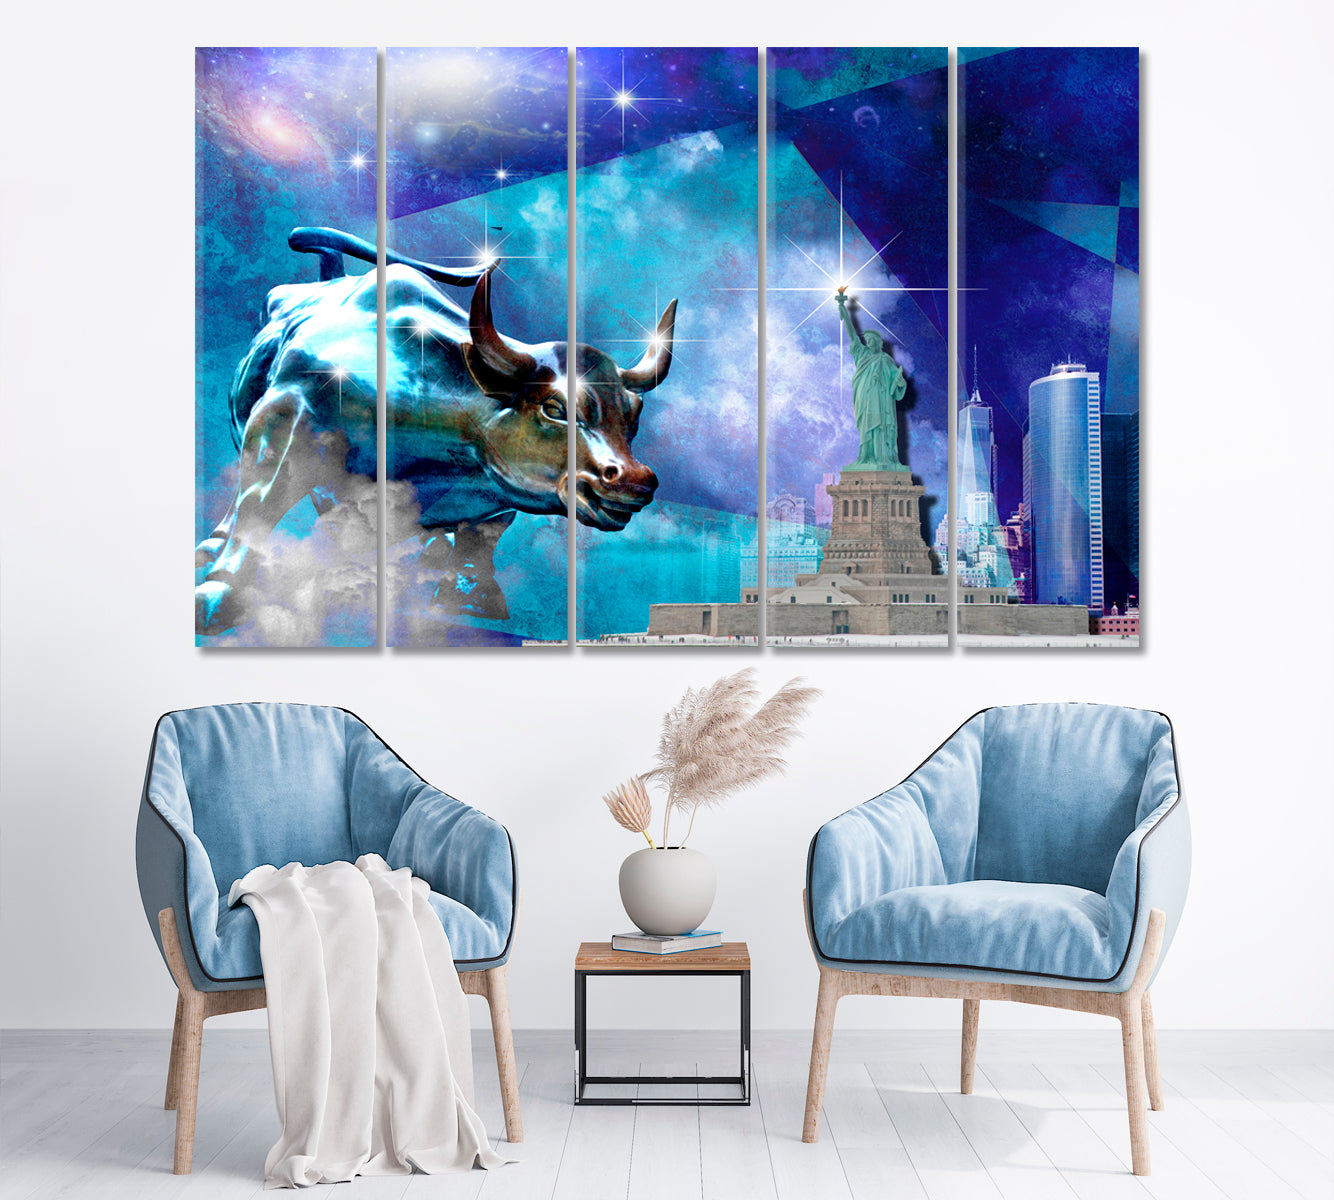 Charging Bull Sculpture and Statue of Liberty Cities Wall Art Artesty 5 panels 36" x 24" 